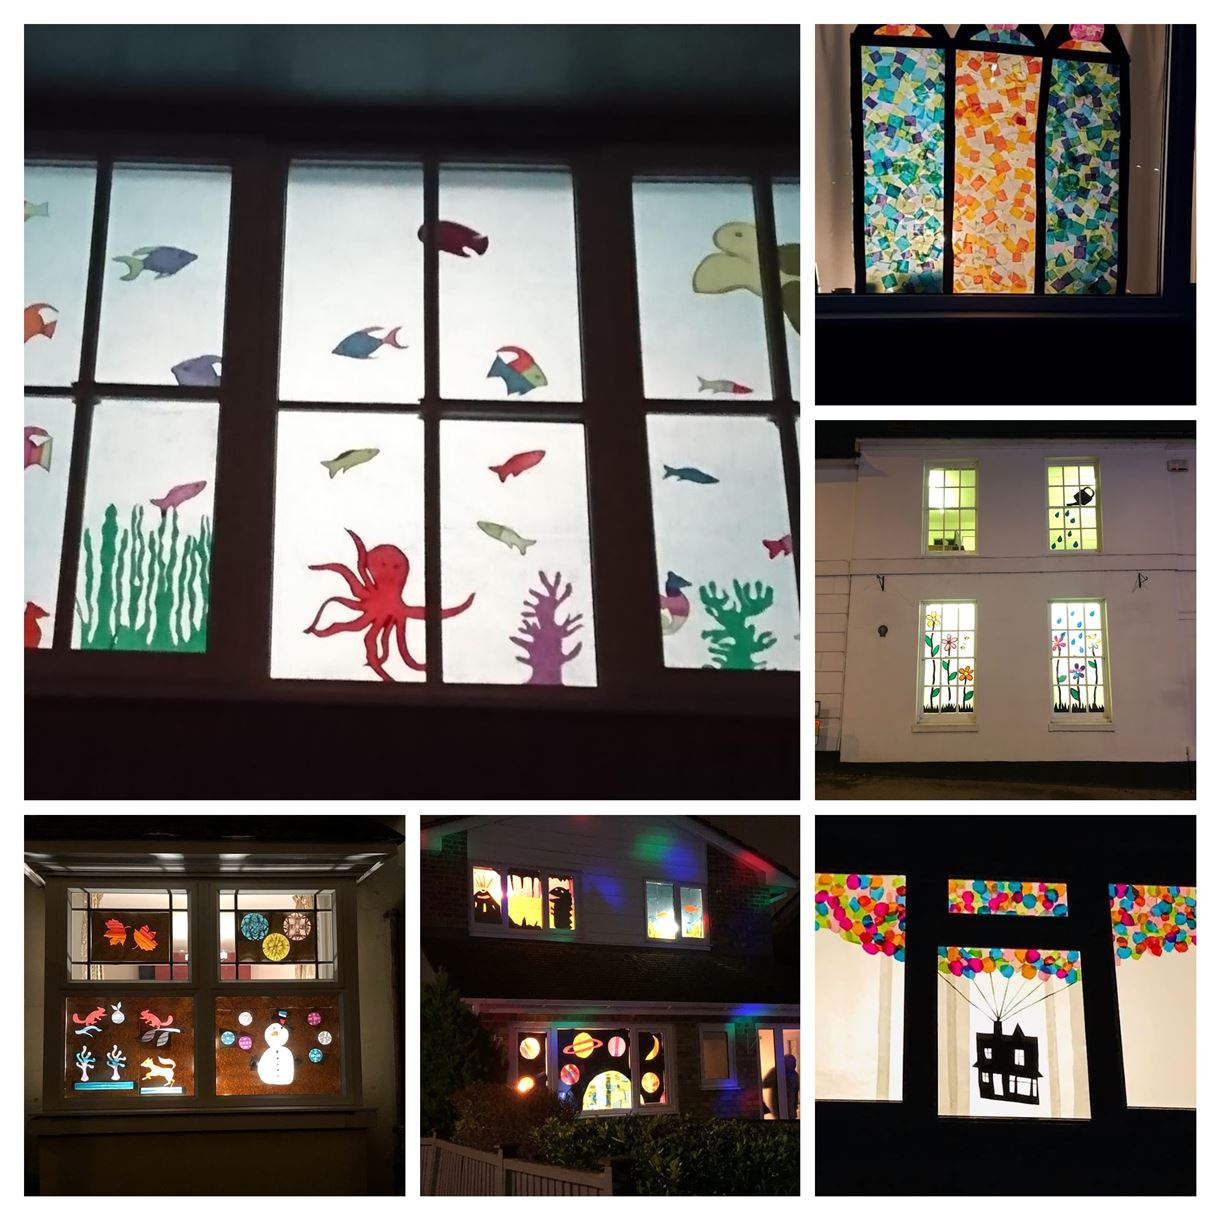 A selection of windows in the Winter Wanderland